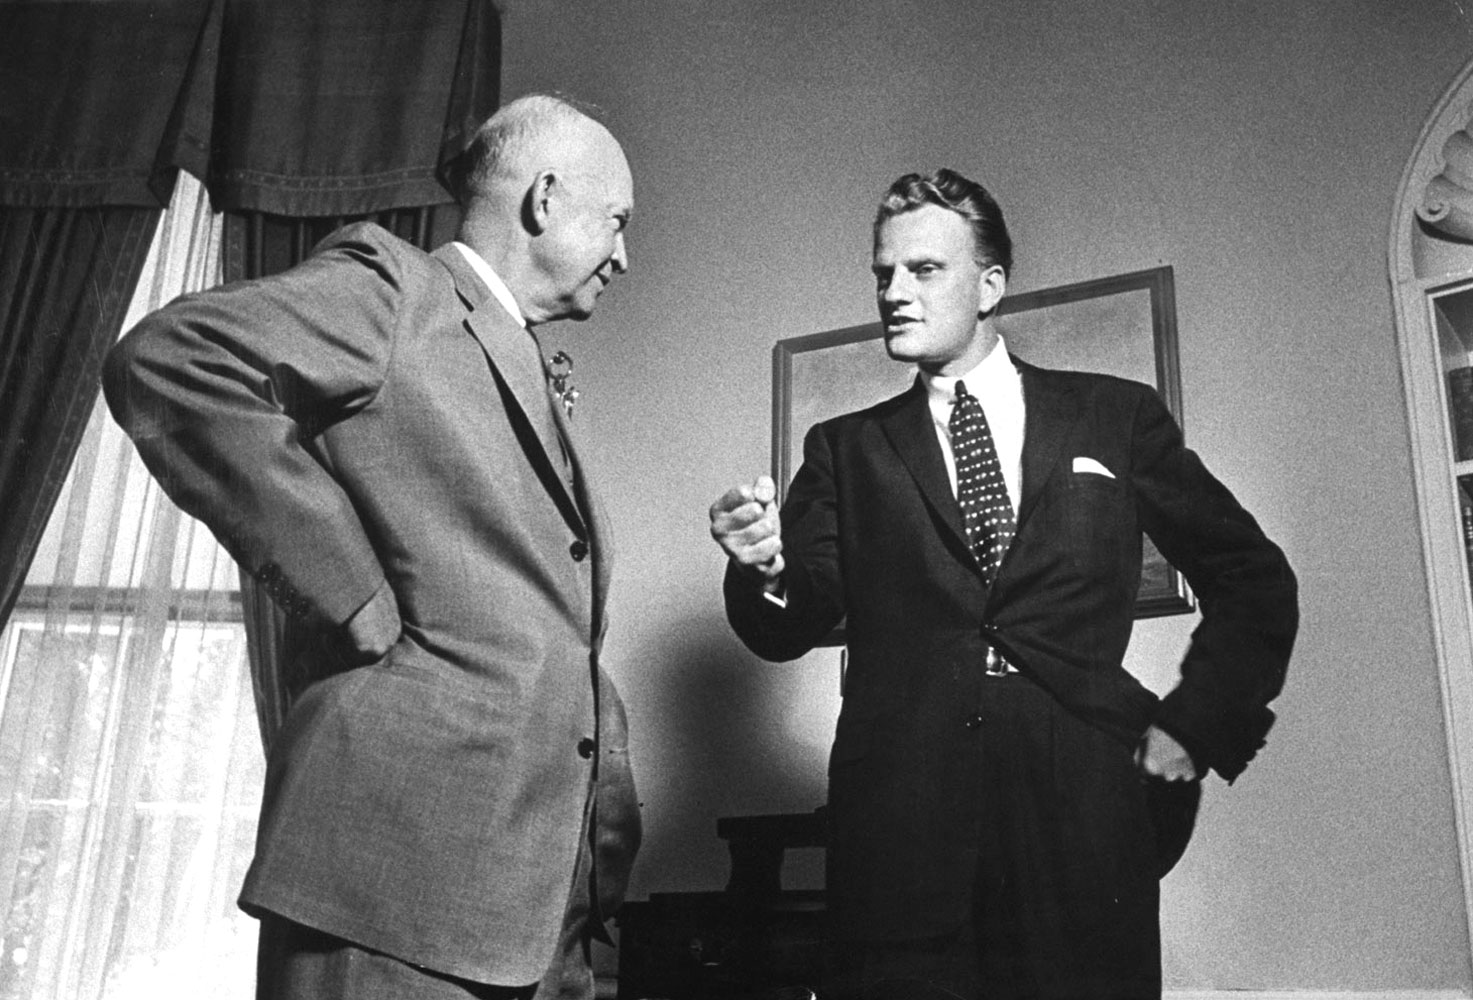 Graham speaks with President Dwight Eisenhower at the White House, May 11, 1957.